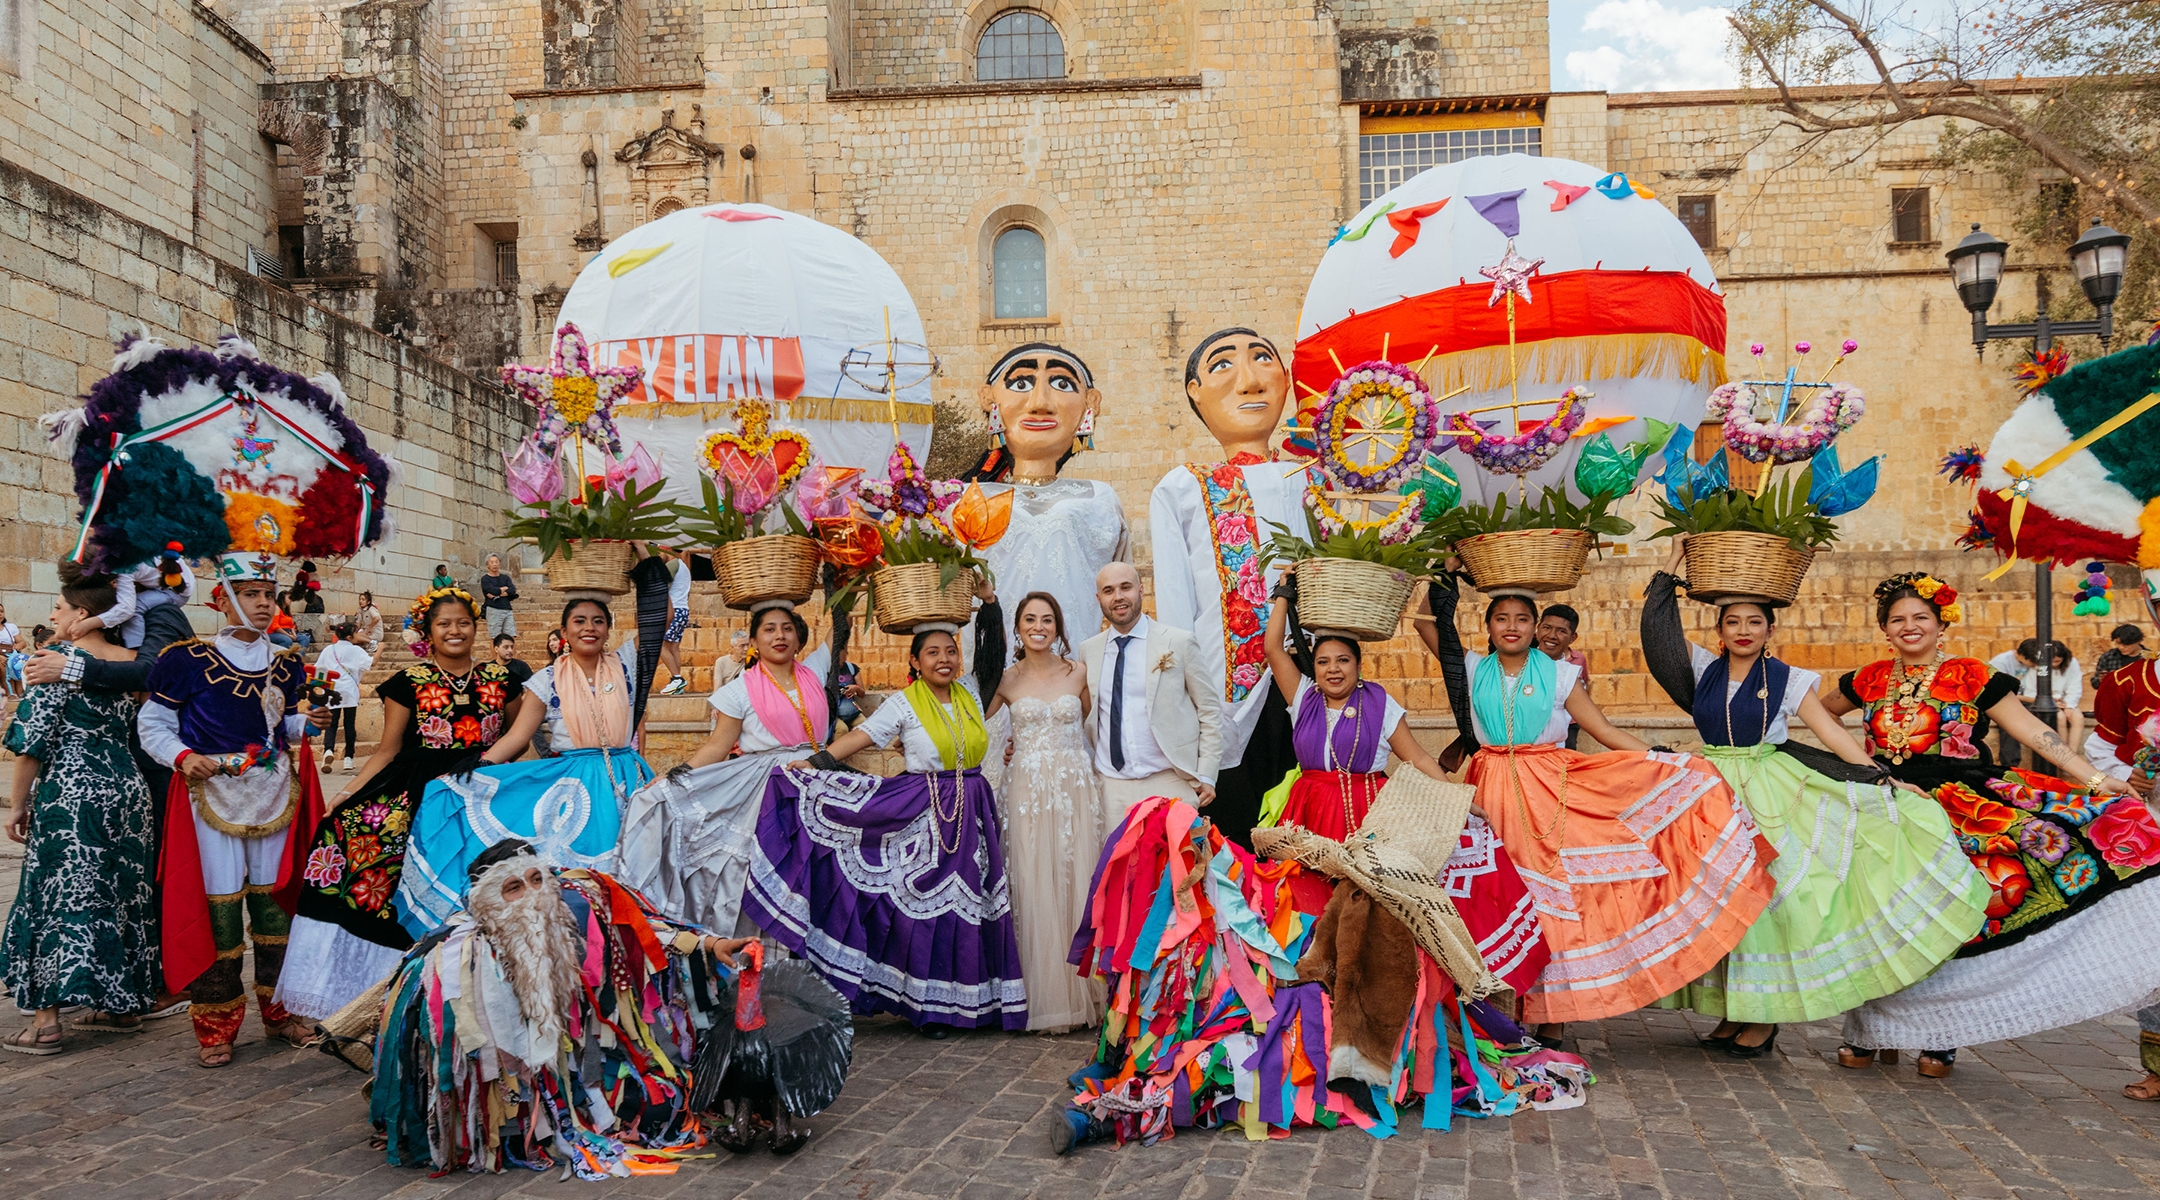 Hallie Applebaum and Evan Raffel pose with dancers who joined their public wedding procession in Oaxaca. (Mónica Godefroy)